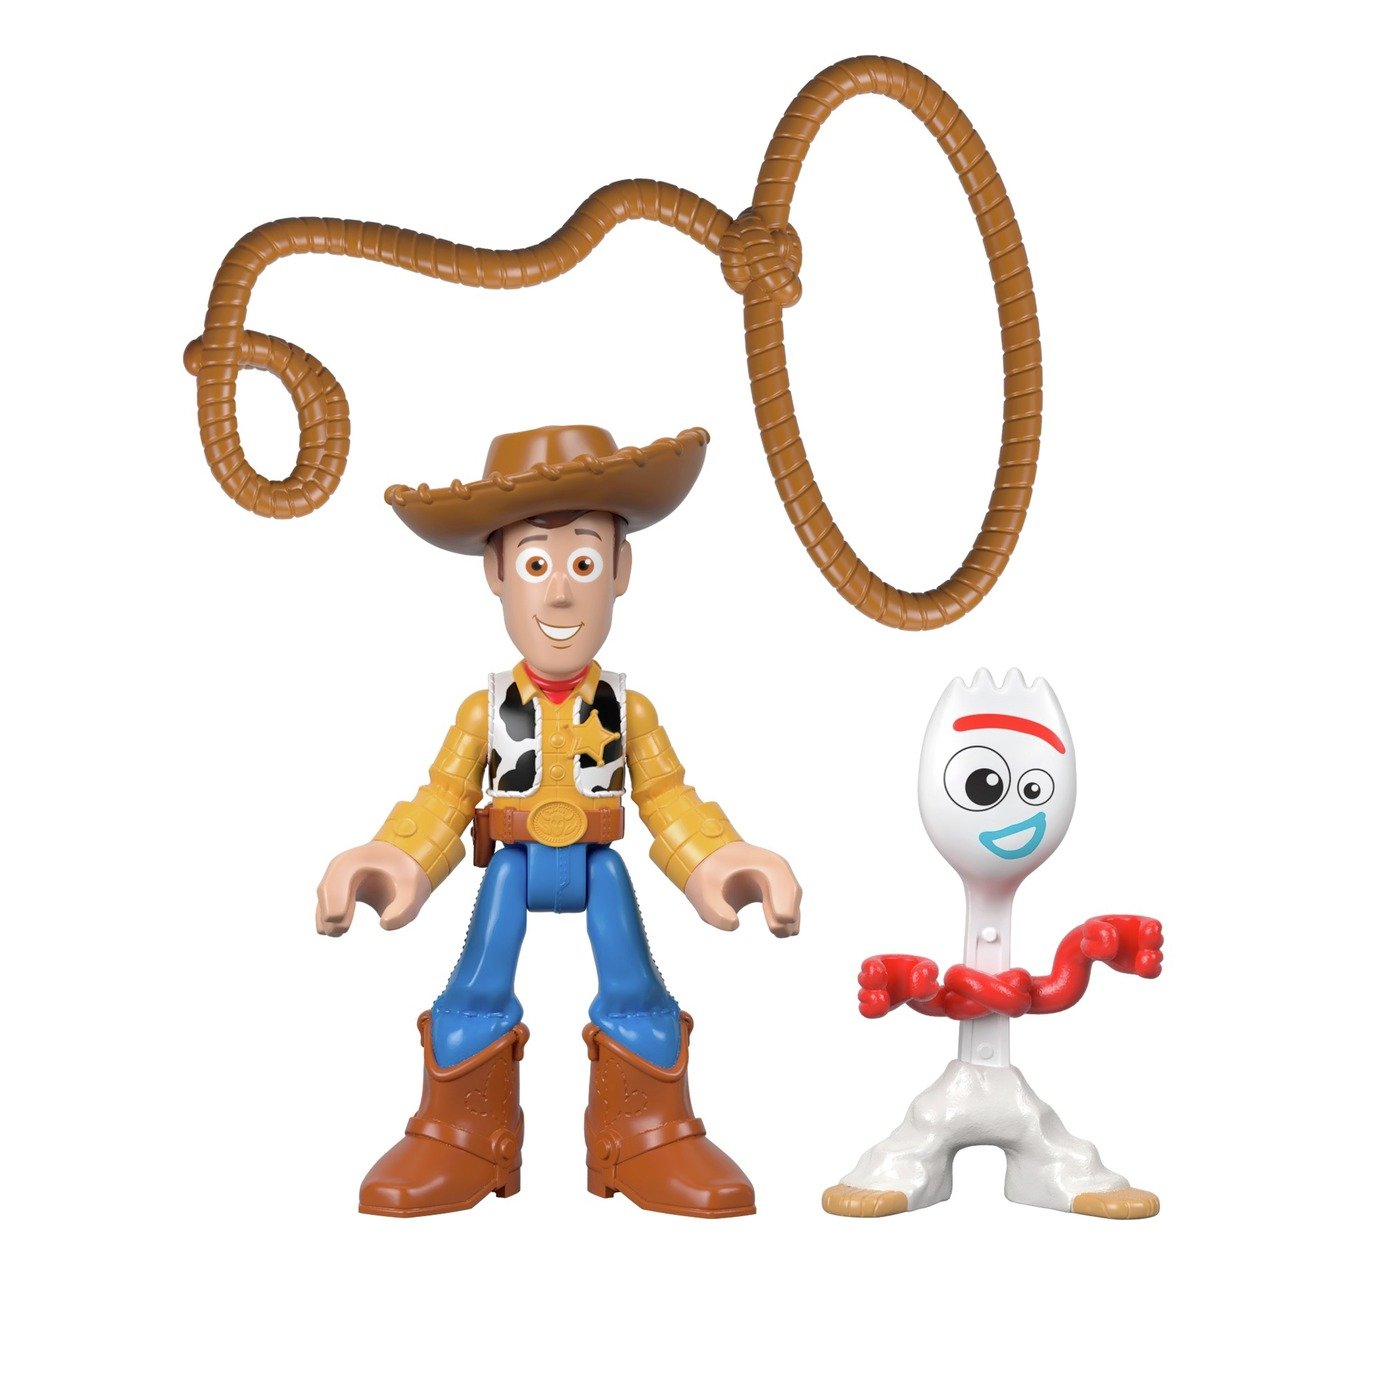 Disney Pixar Toy Story 4  Imaginext Woody & Forky Review